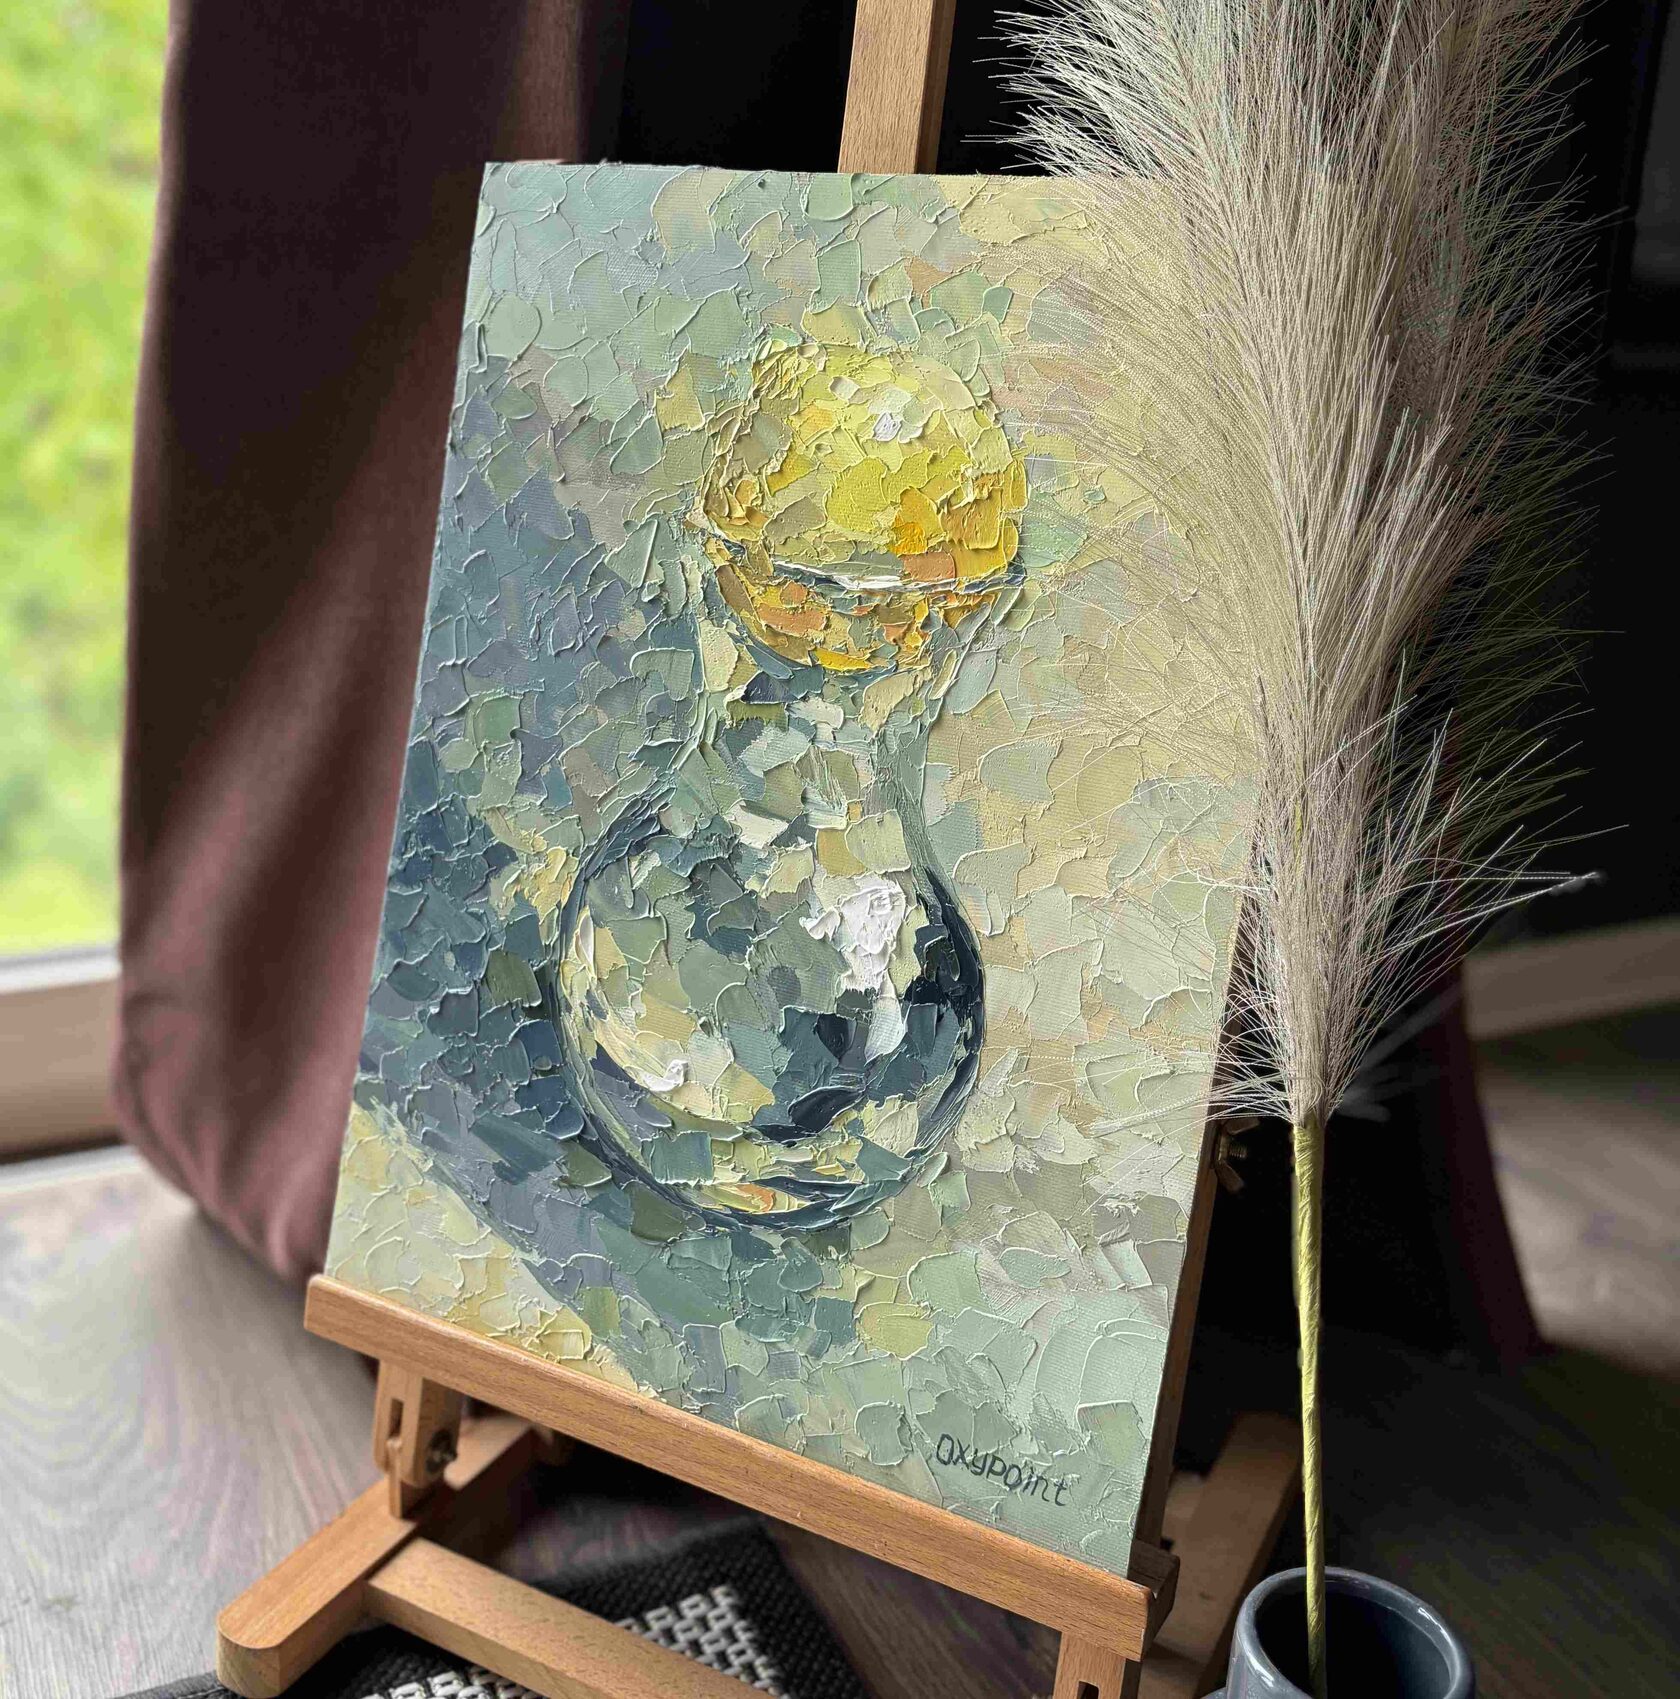 lemon oil painting, still life with glass, abstract art, balance painting with a knife, artist OXYPOINT Oxana Kravtsova